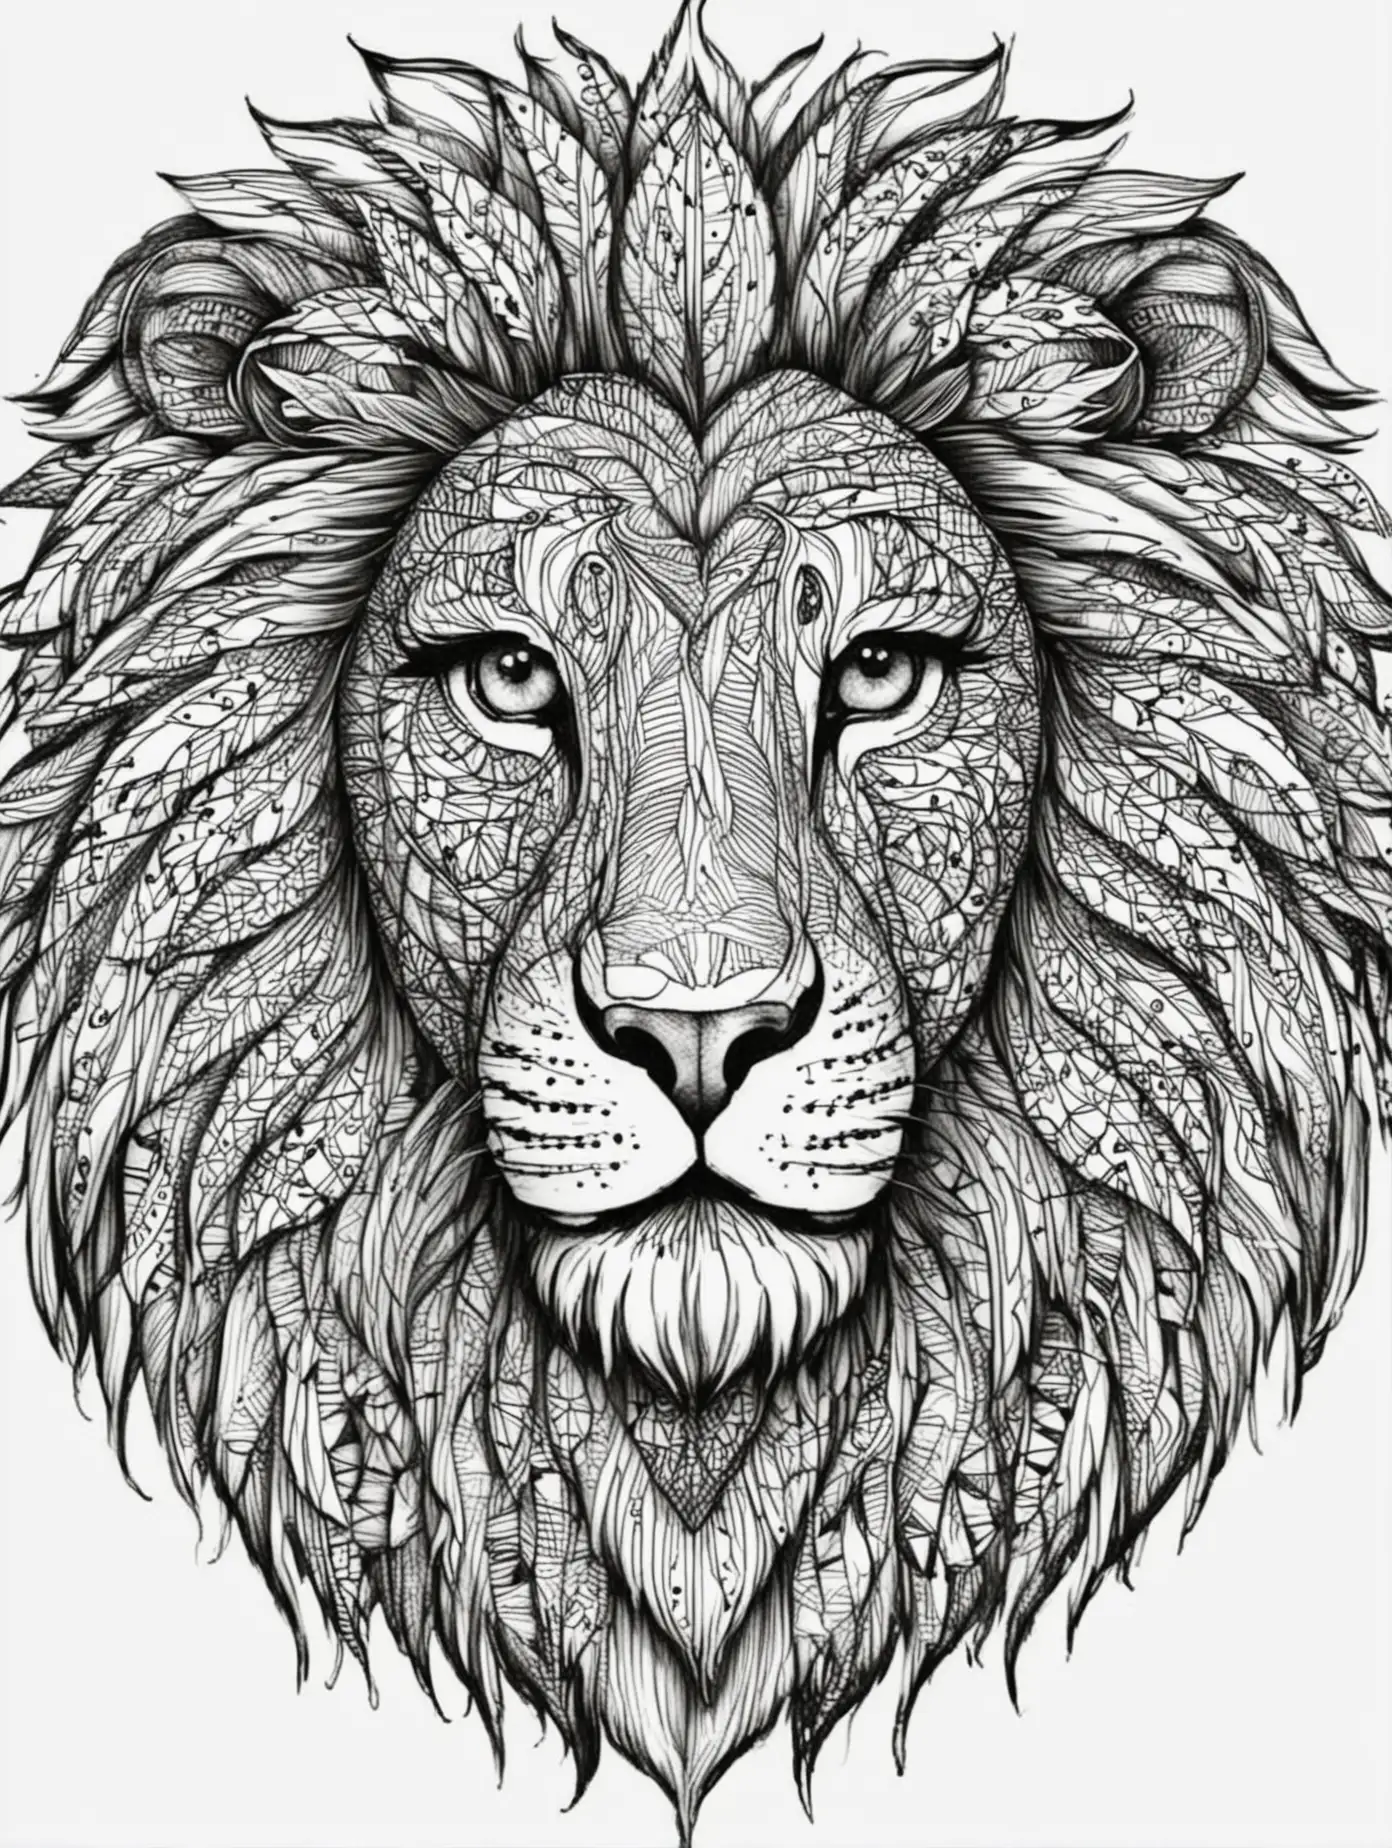 https://pngtree.com/freepng/lion-head-illustration_13410906.html in zentangle style black and white, clear lines, white background
